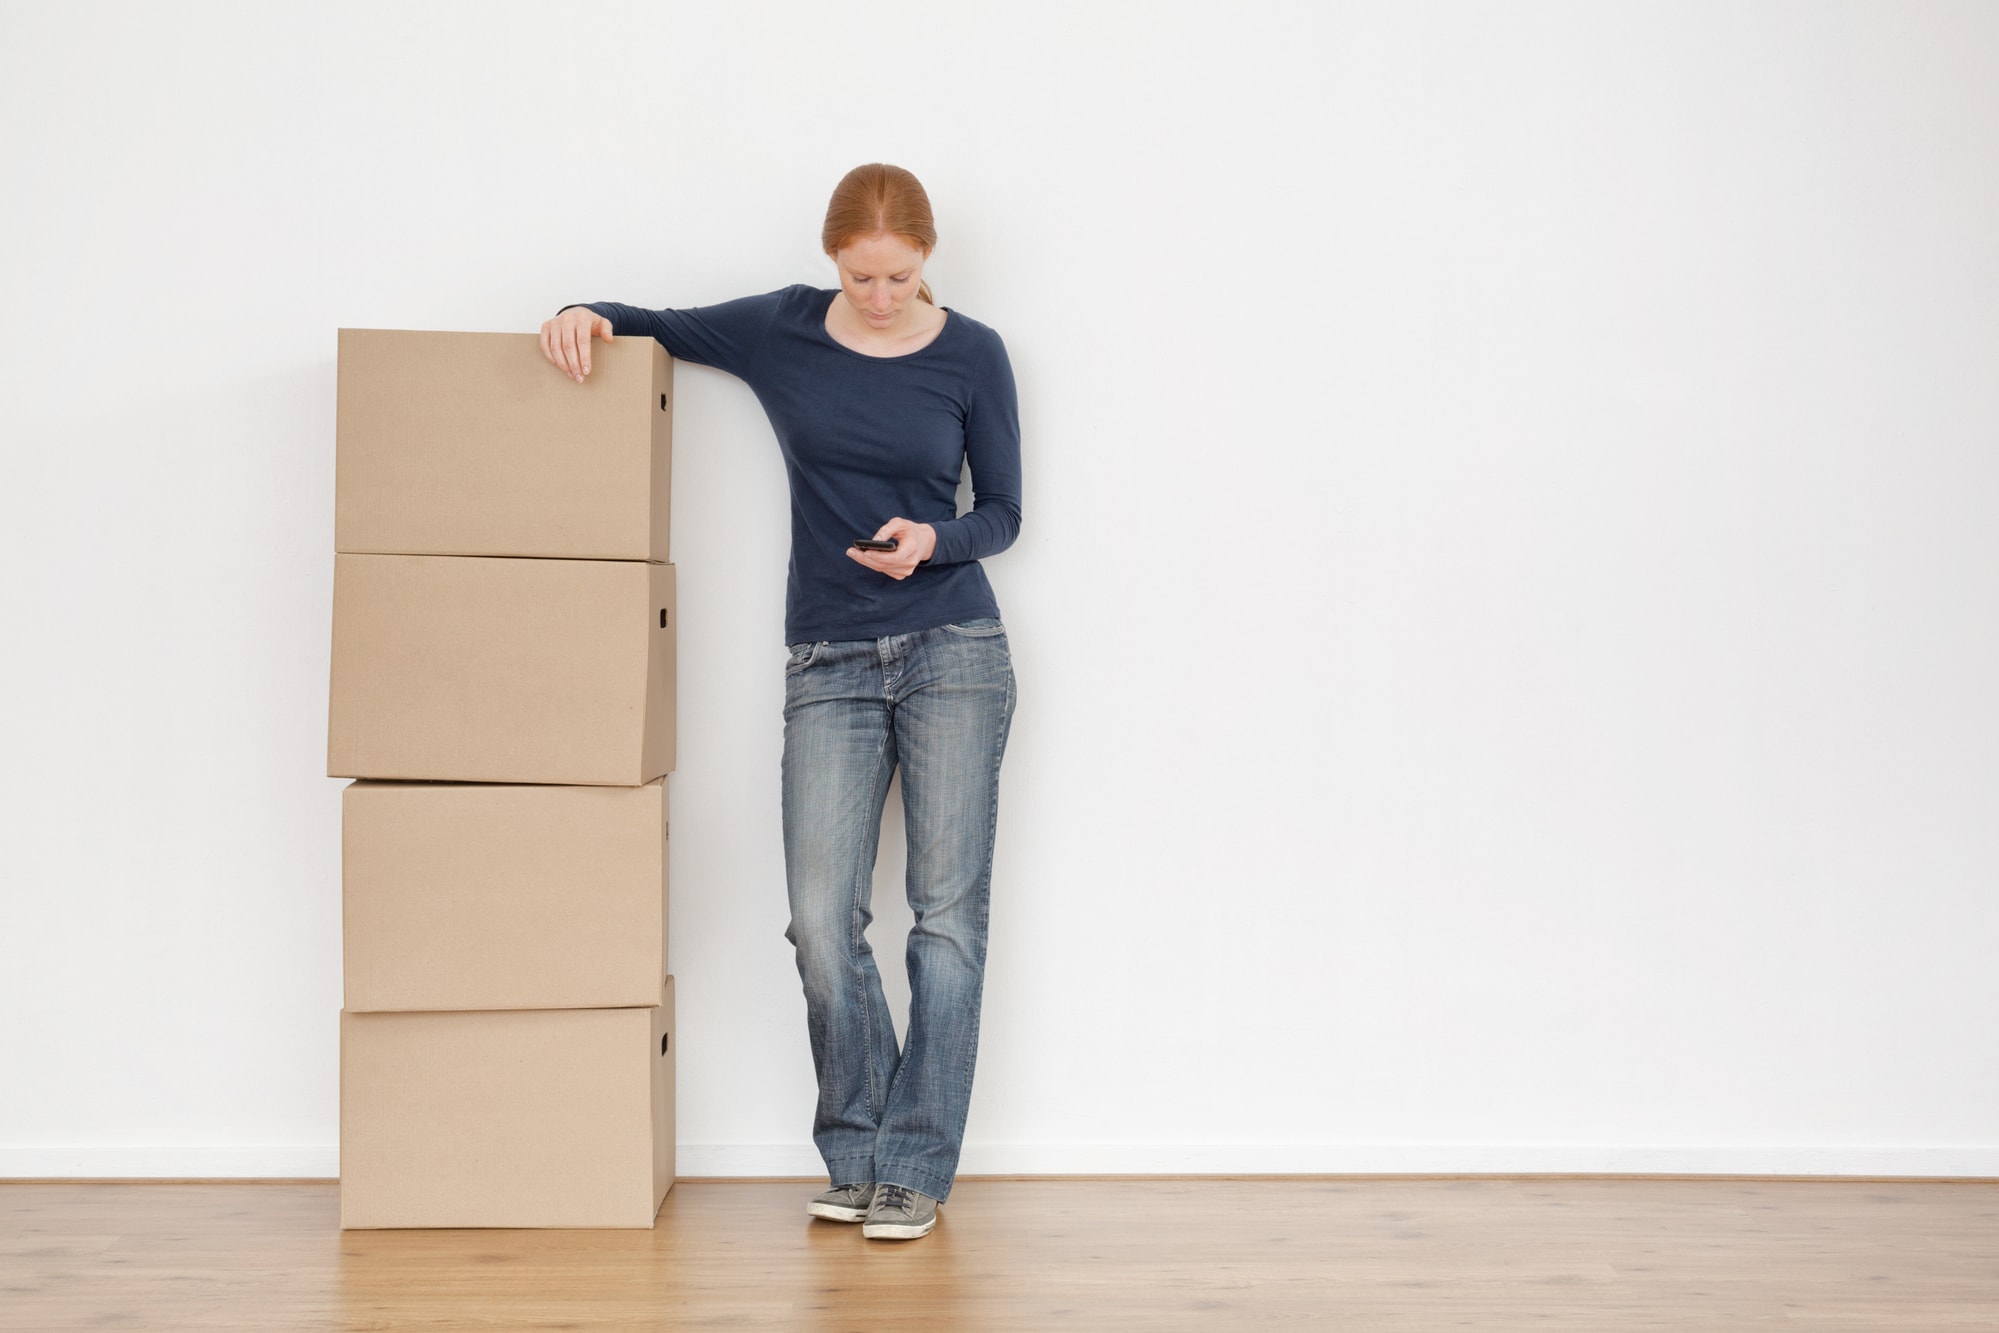 Should you move out of your home during divorce?